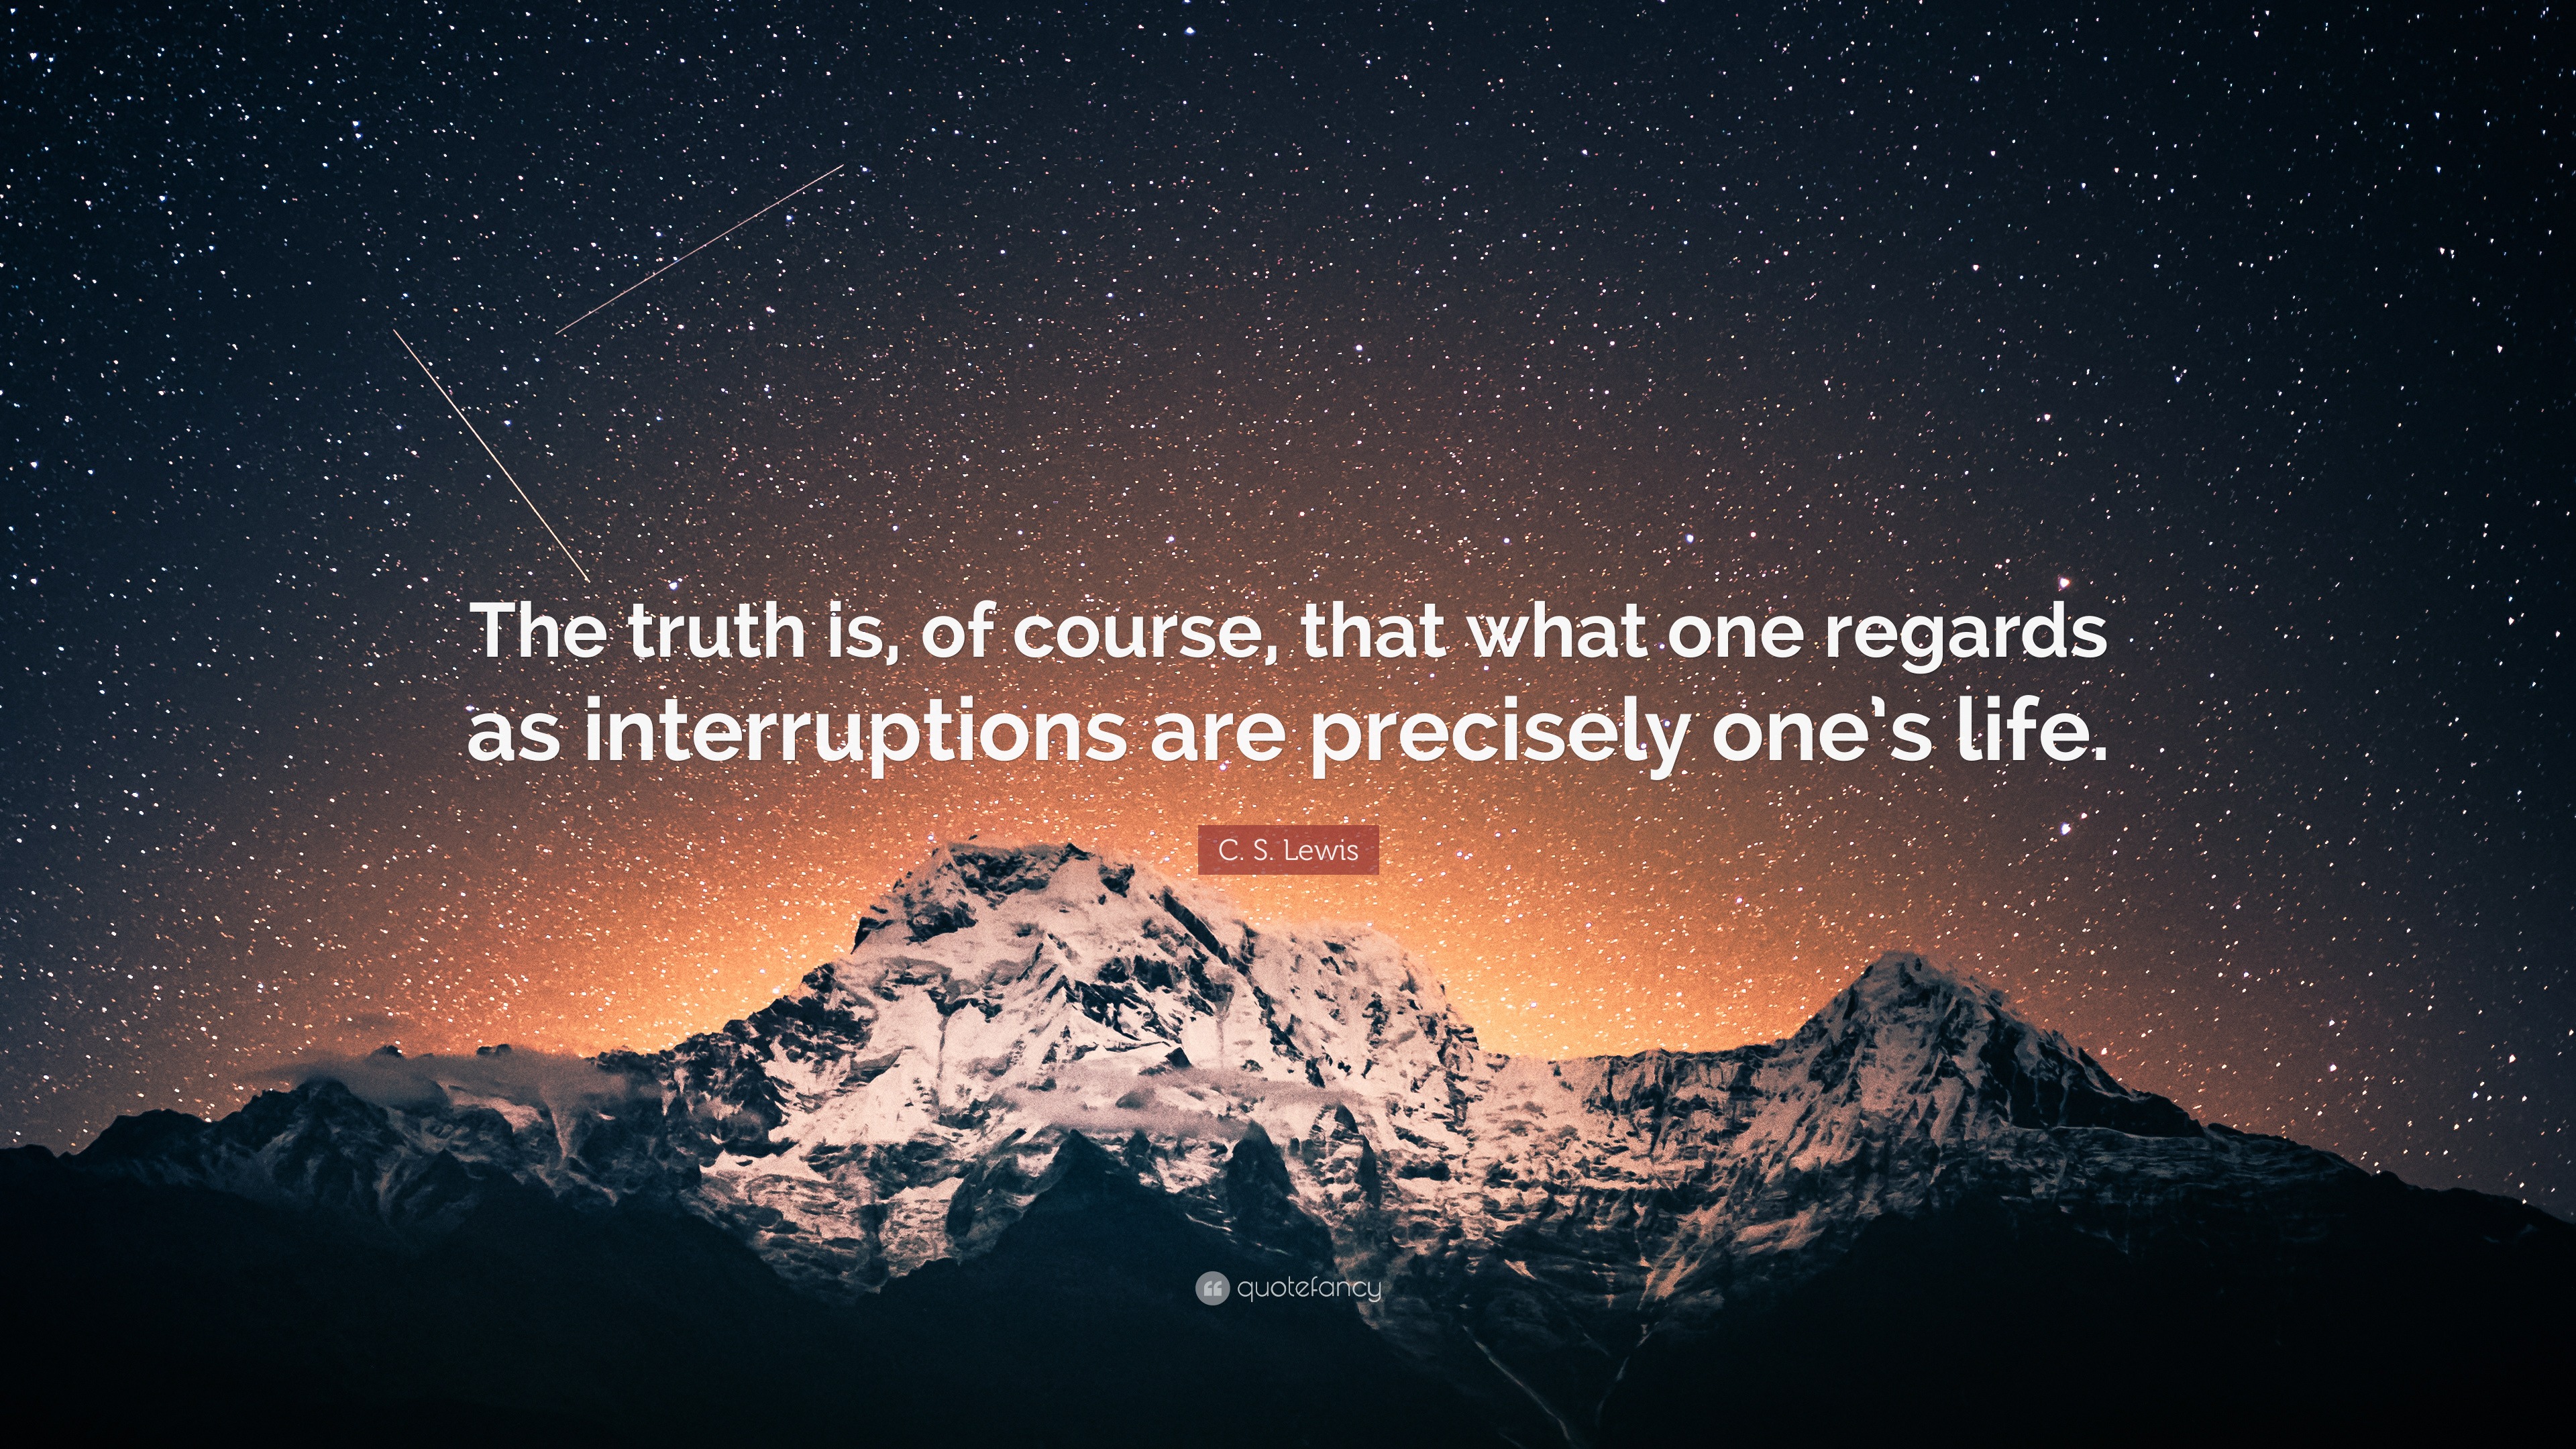 C. S. Lewis Quote: “The truth is, of course, that what one regards as interruptions are precisely